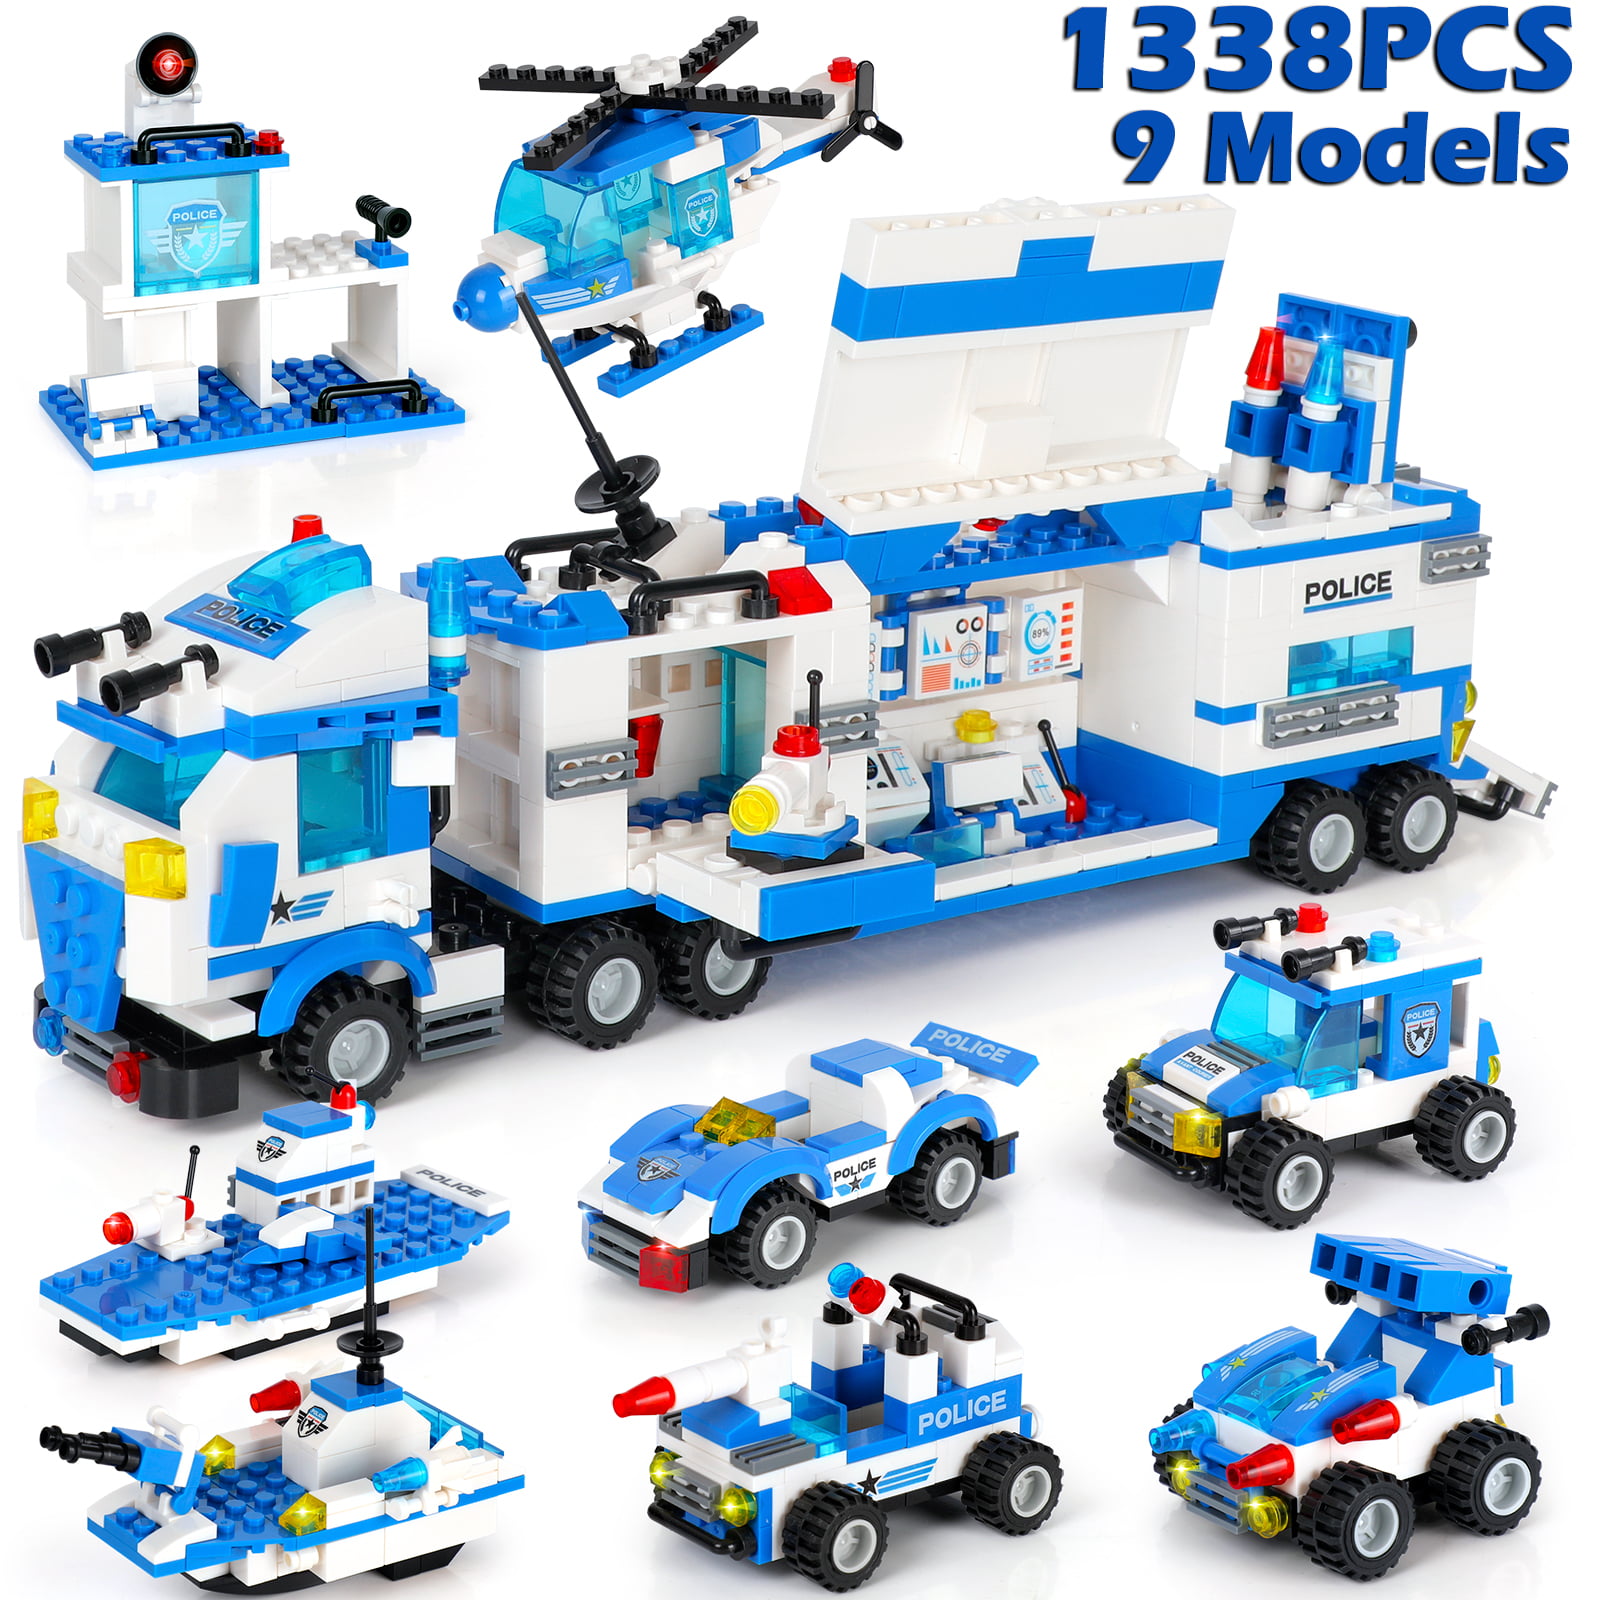 796 Pieces City Police Military Battleship Building Blocks Set Police Helicopter Patrol Boat Cop Car Bomber DIY Construction Toy Storage Box with Baseplates Lid Building Gift for Boys Girls 6-12 